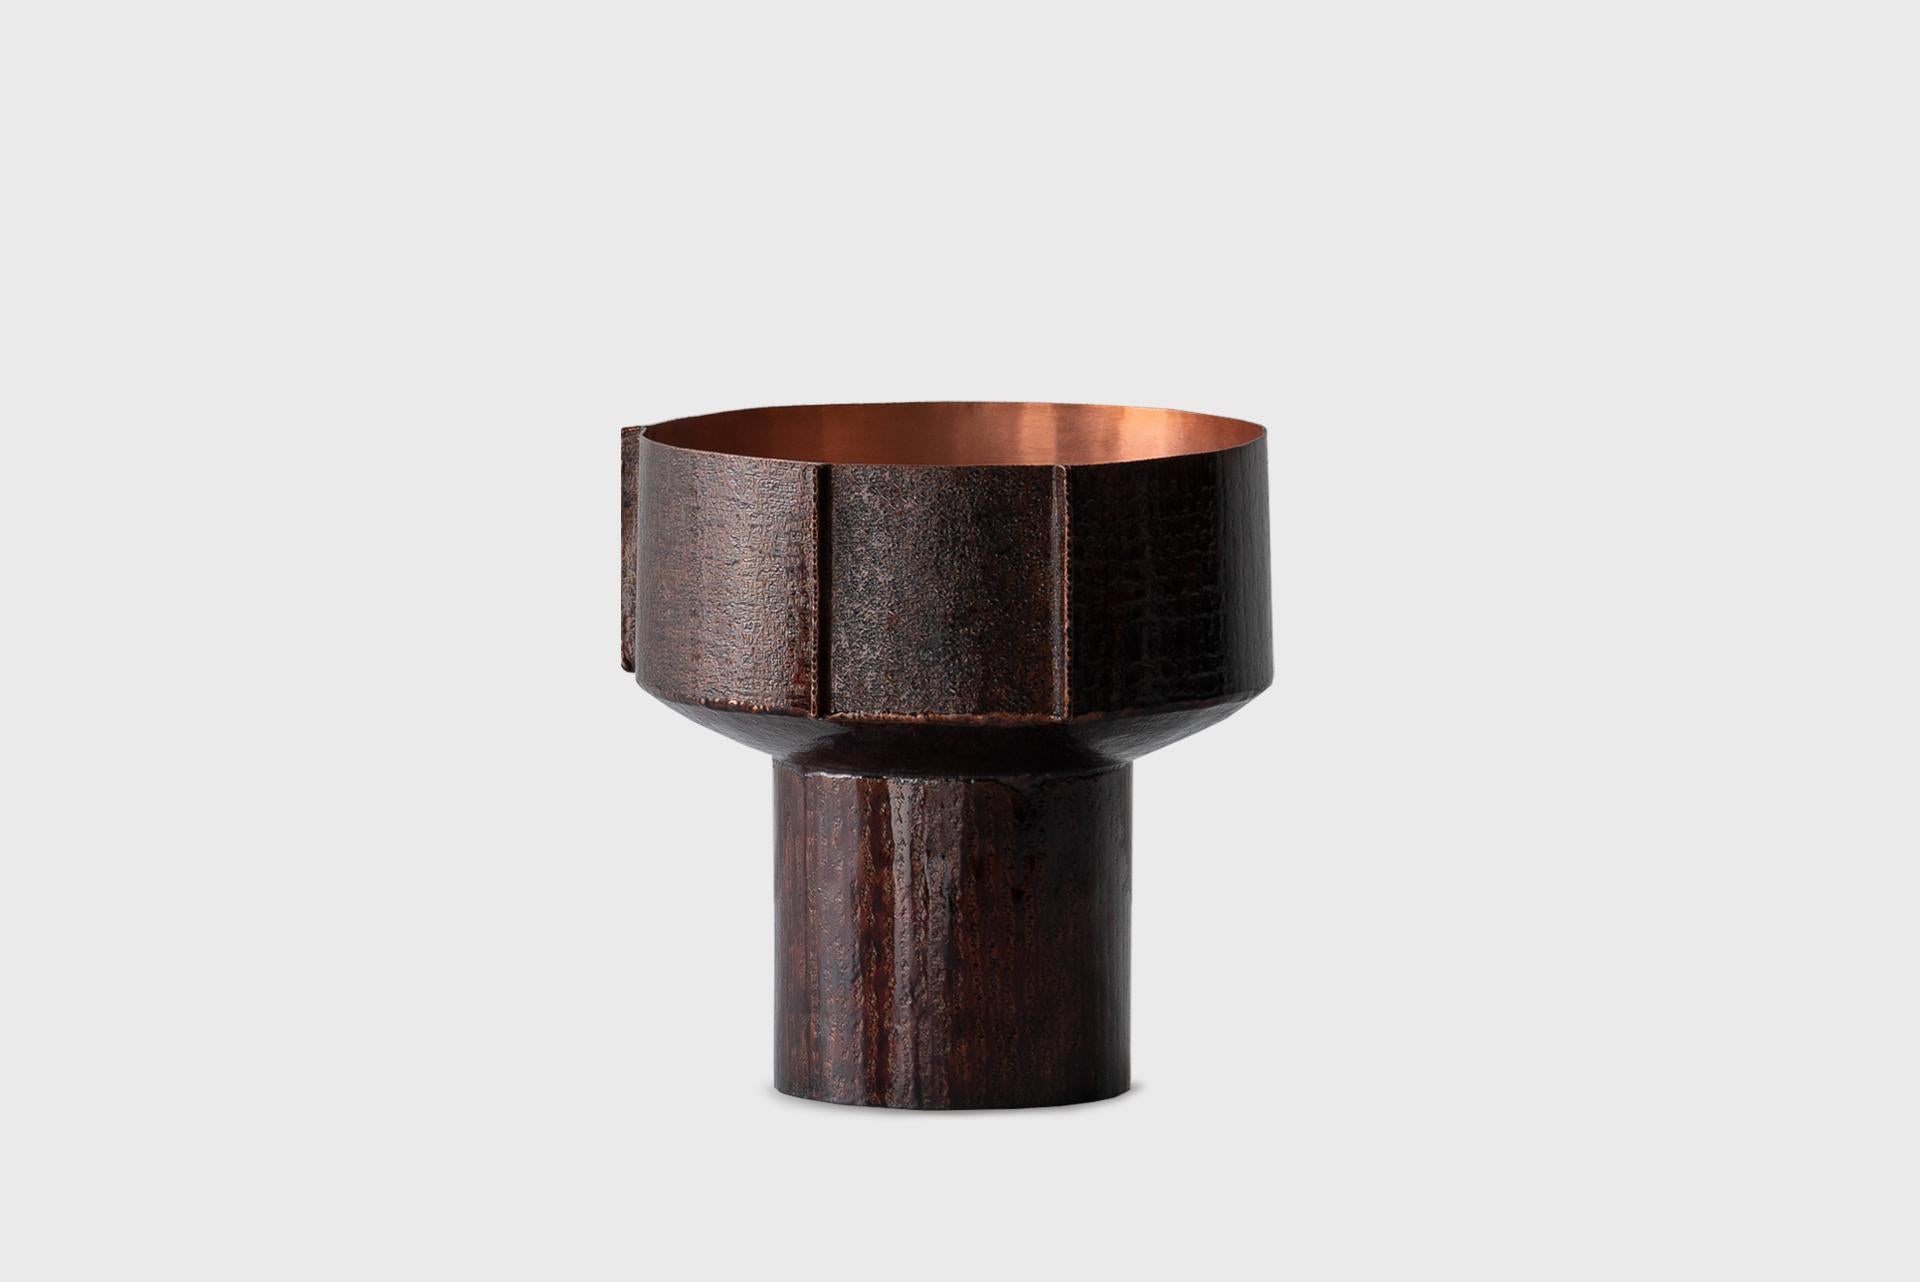 Contemporary Copper Vase 3, Textured Natural Dark Lacquer, Seung Hyun Lee, Korea In New Condition For Sale In Barcelona, ES